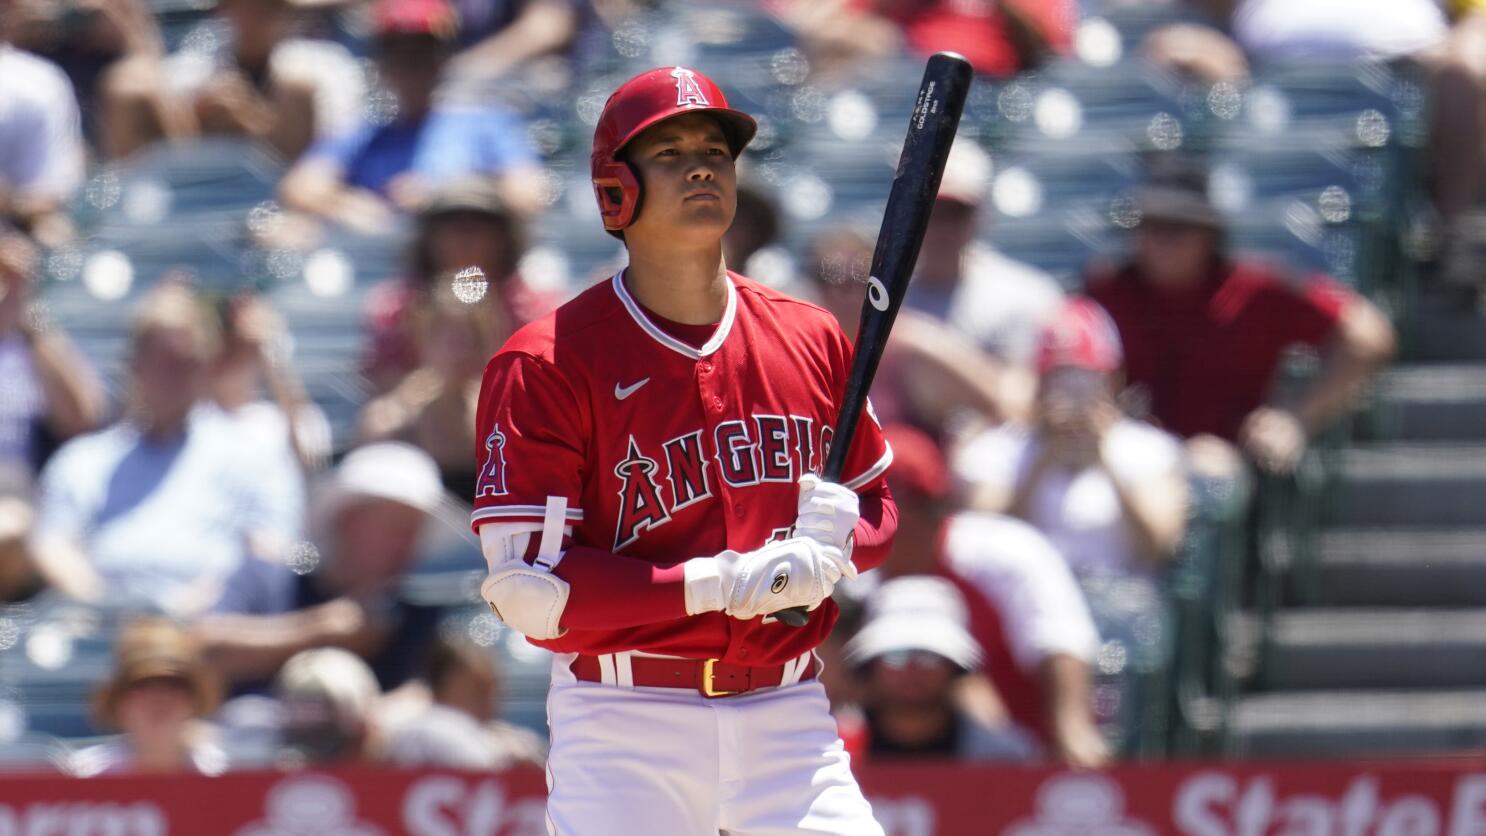 Shohei Ohtani was 'not happy' about losing 2022 AL MVP to Aaron